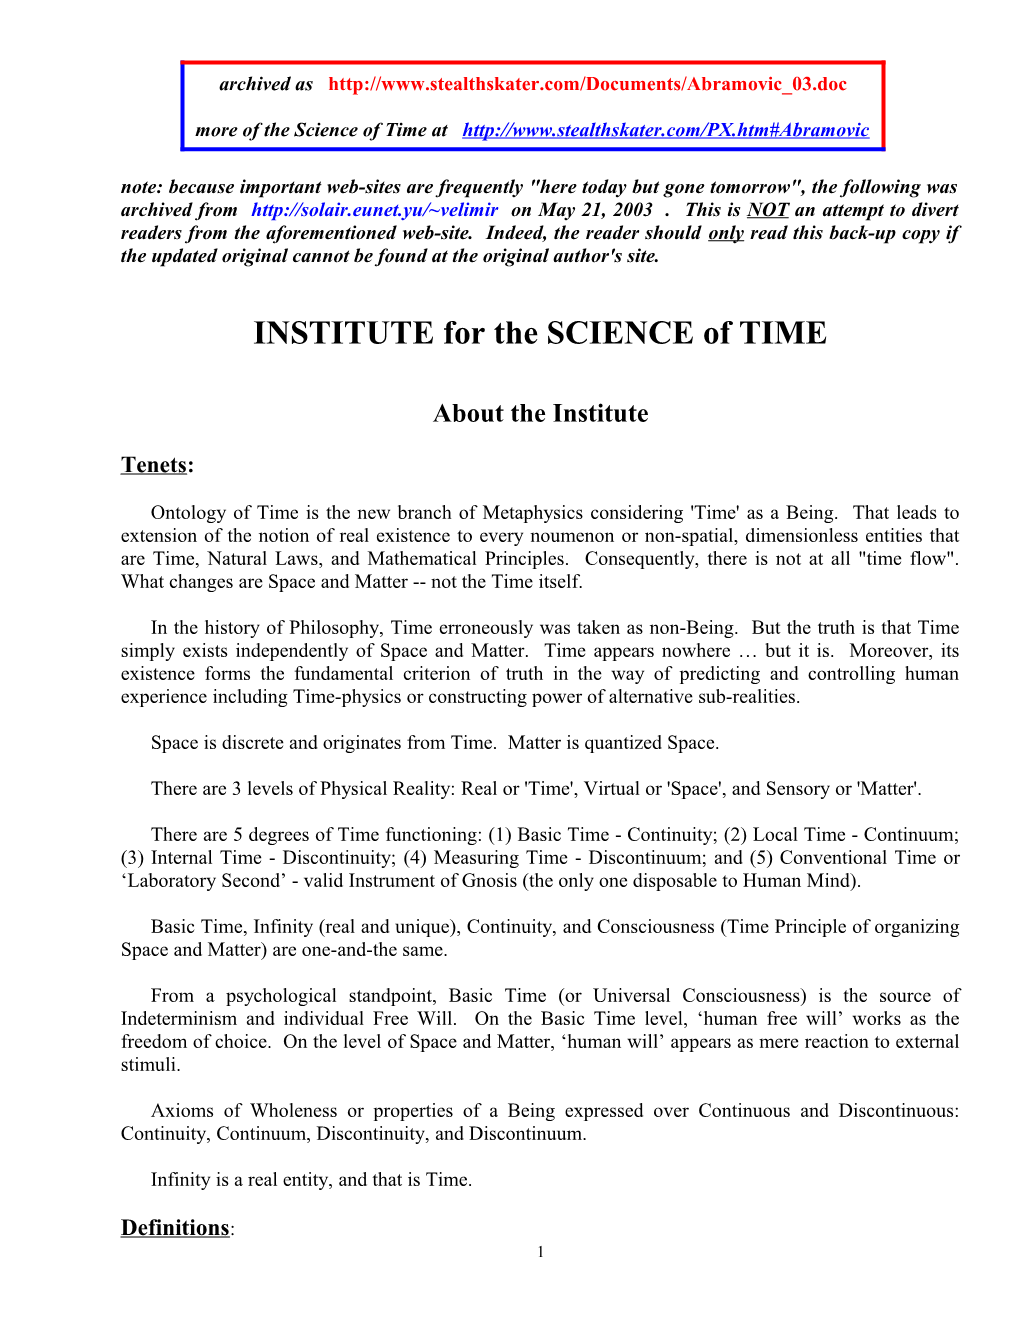 More of the Science of Time At